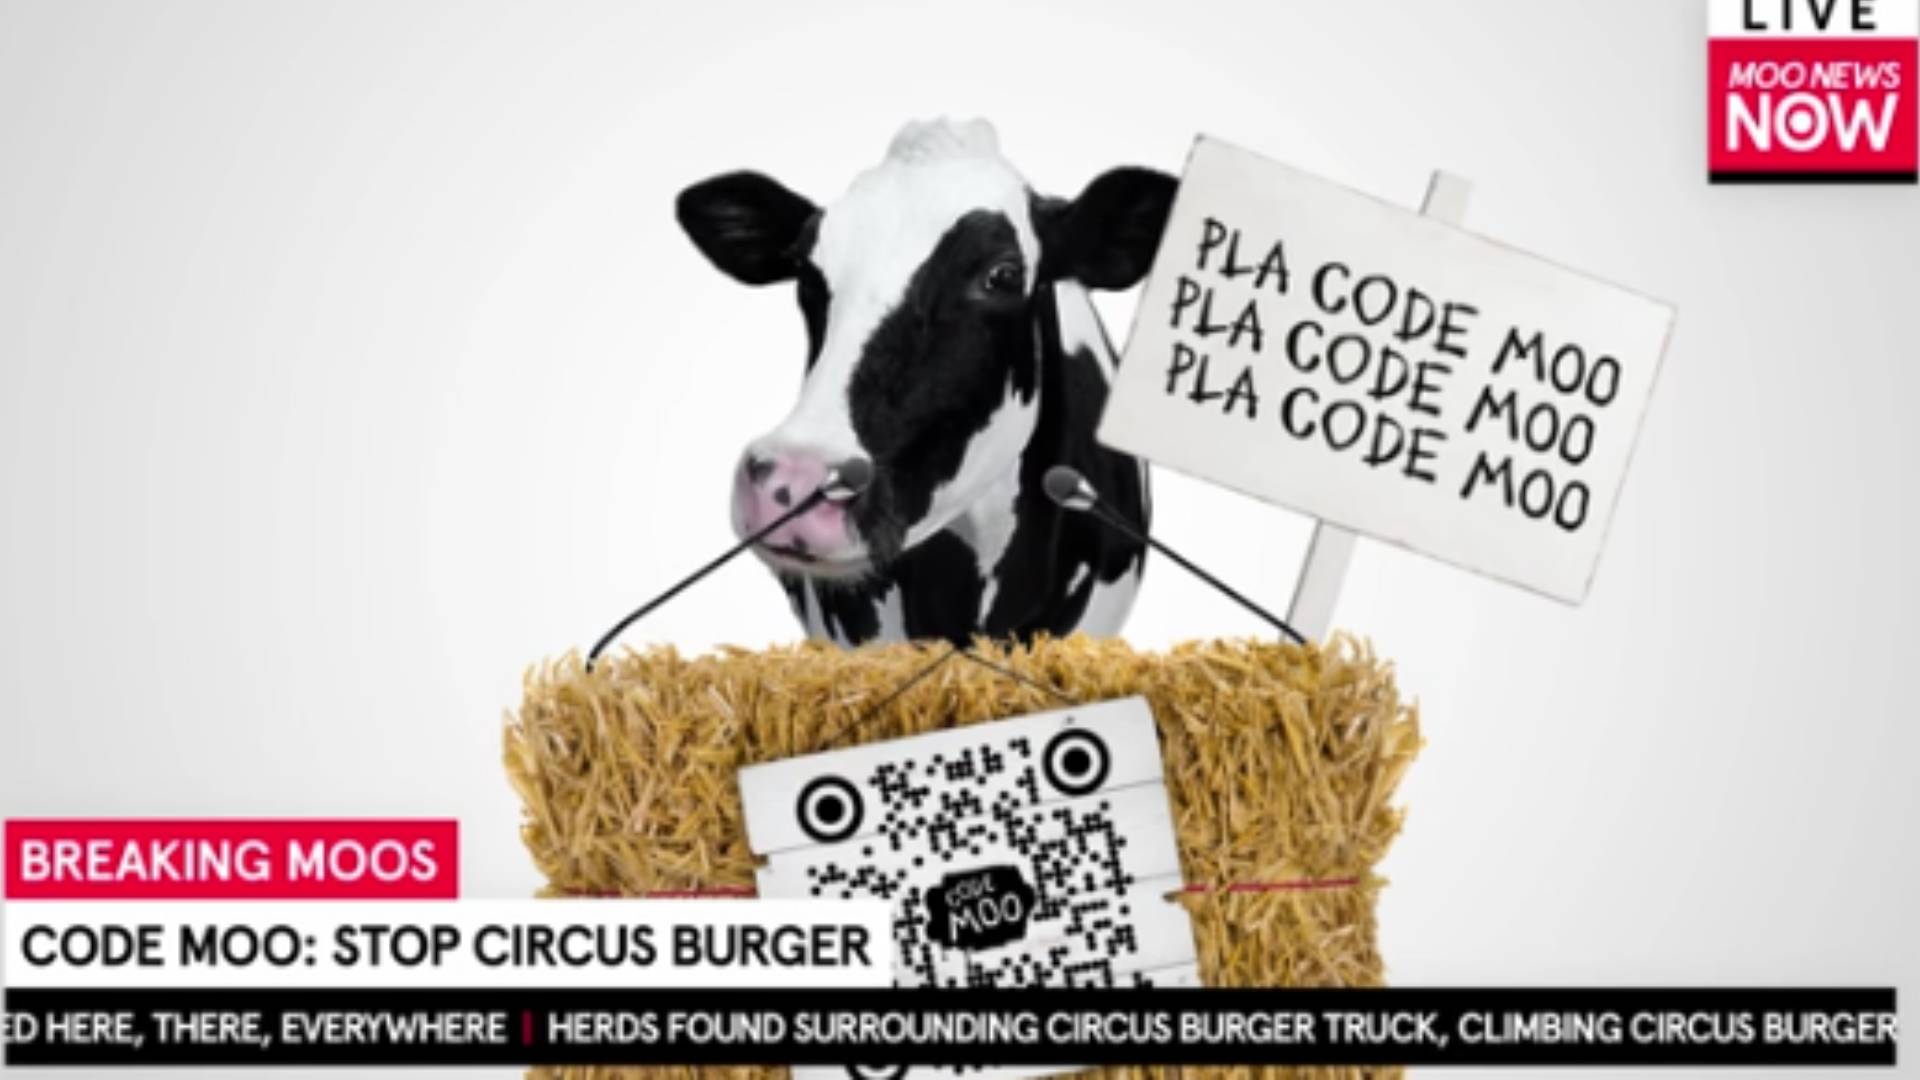 Code Moo! The Cows are Back at Chick-fil-A